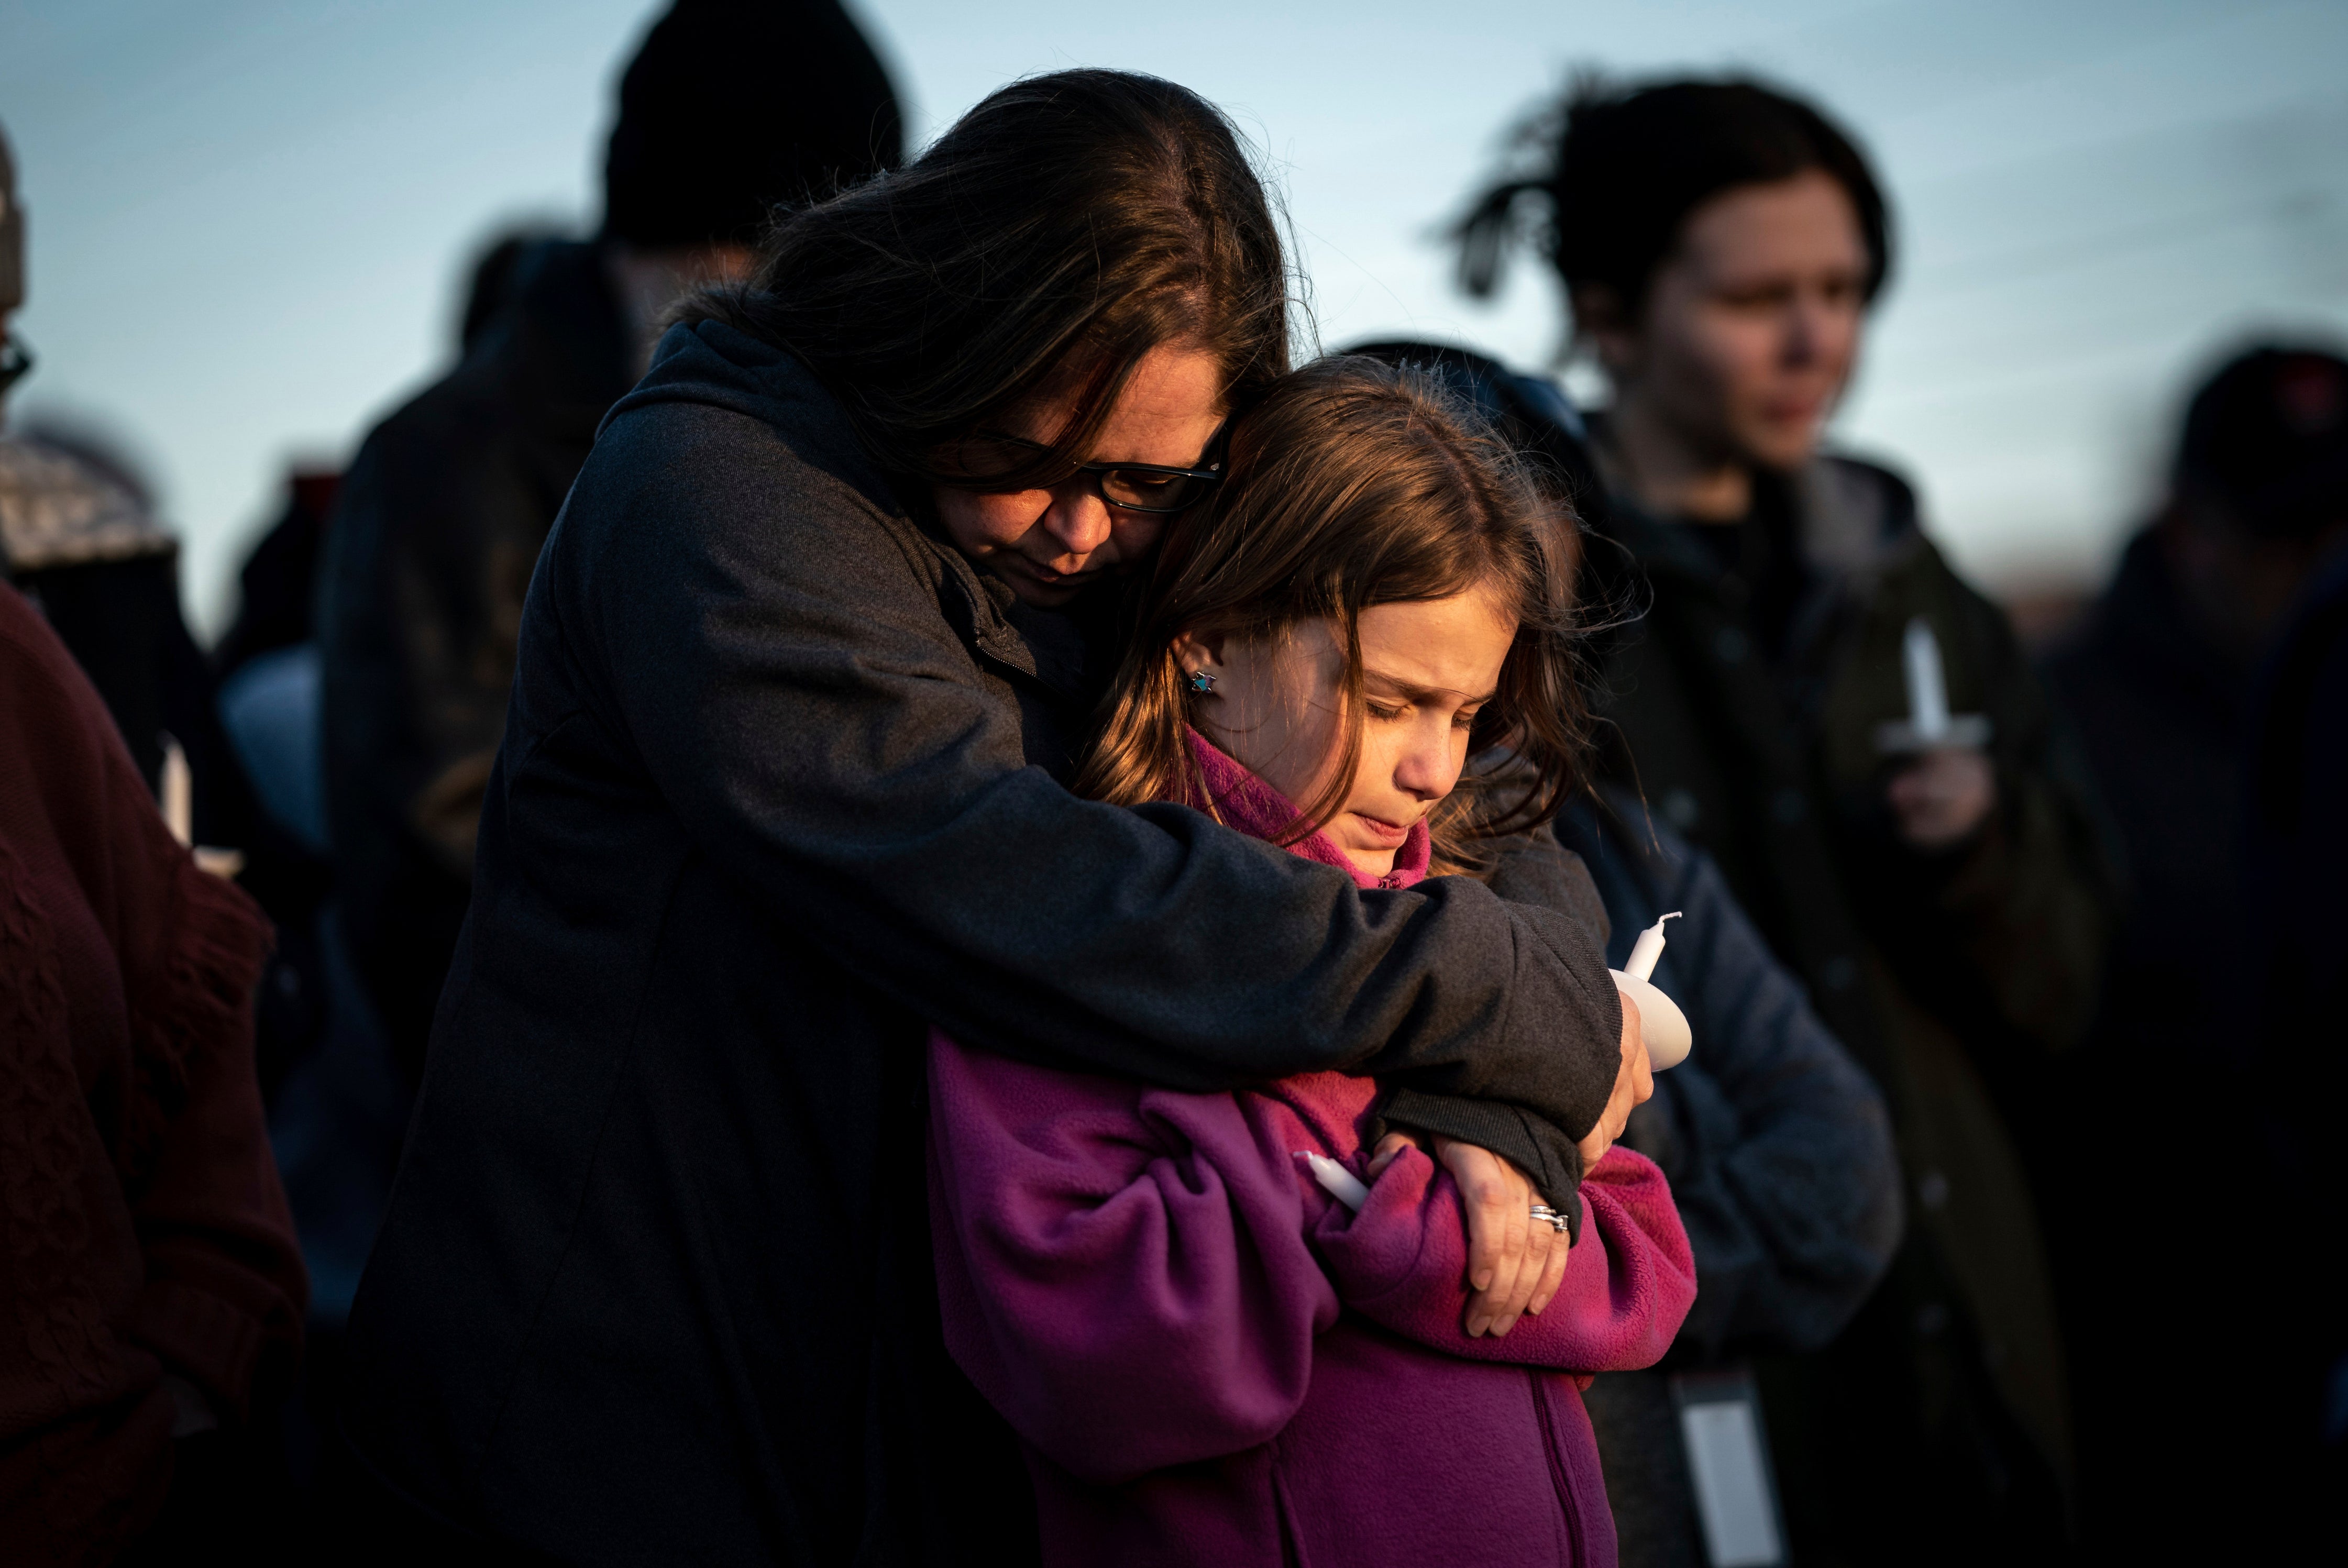 Mourners hug at a vigil following the March school shooting in Nashville which left six dead, not including the shooter killed by police